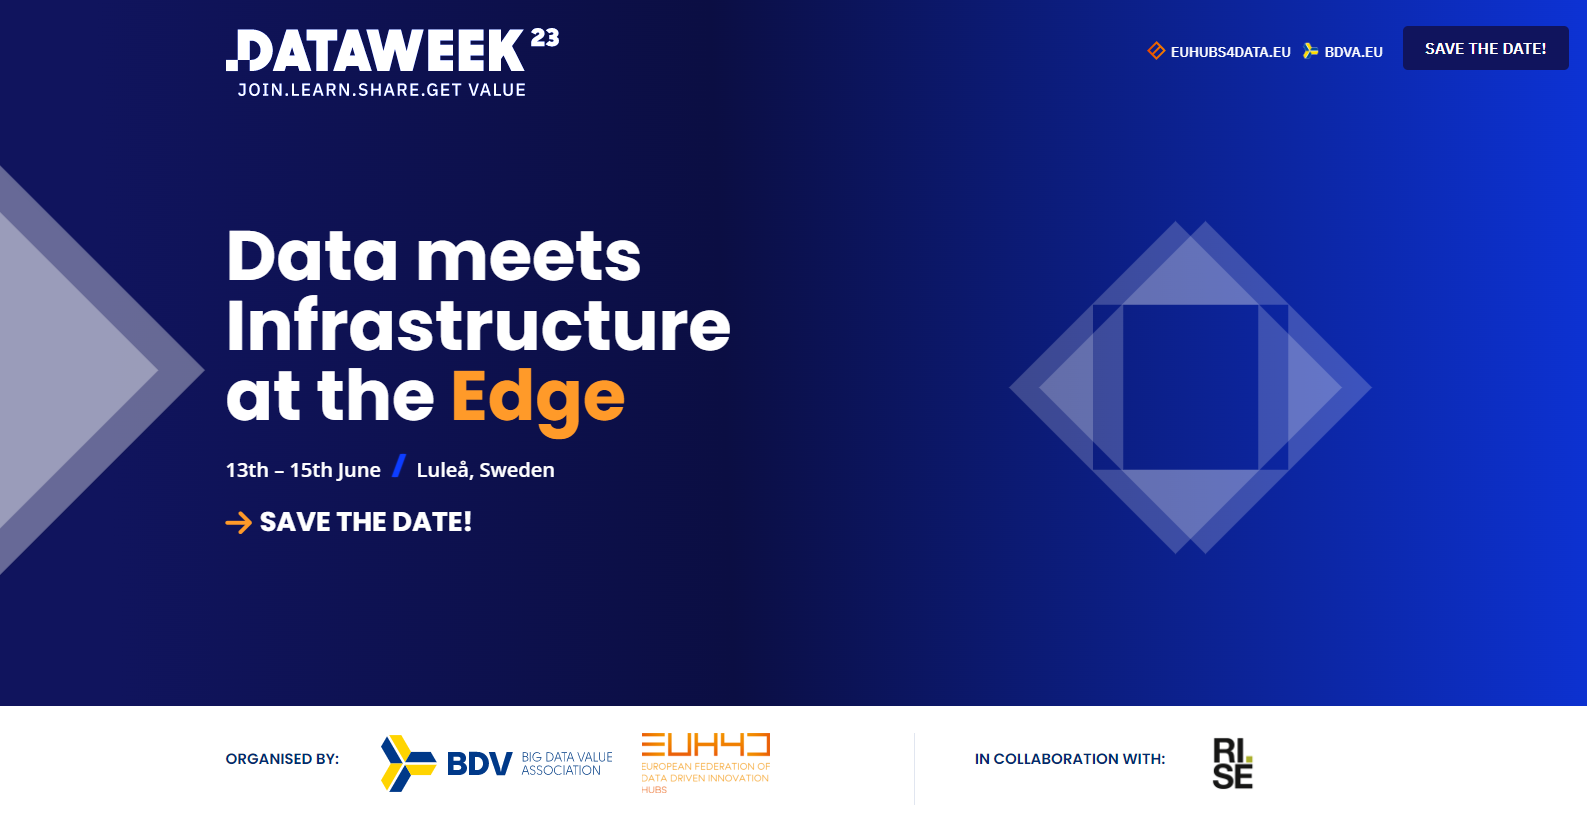 DATAWEEK23 Data meets Infrastructure at the Edge